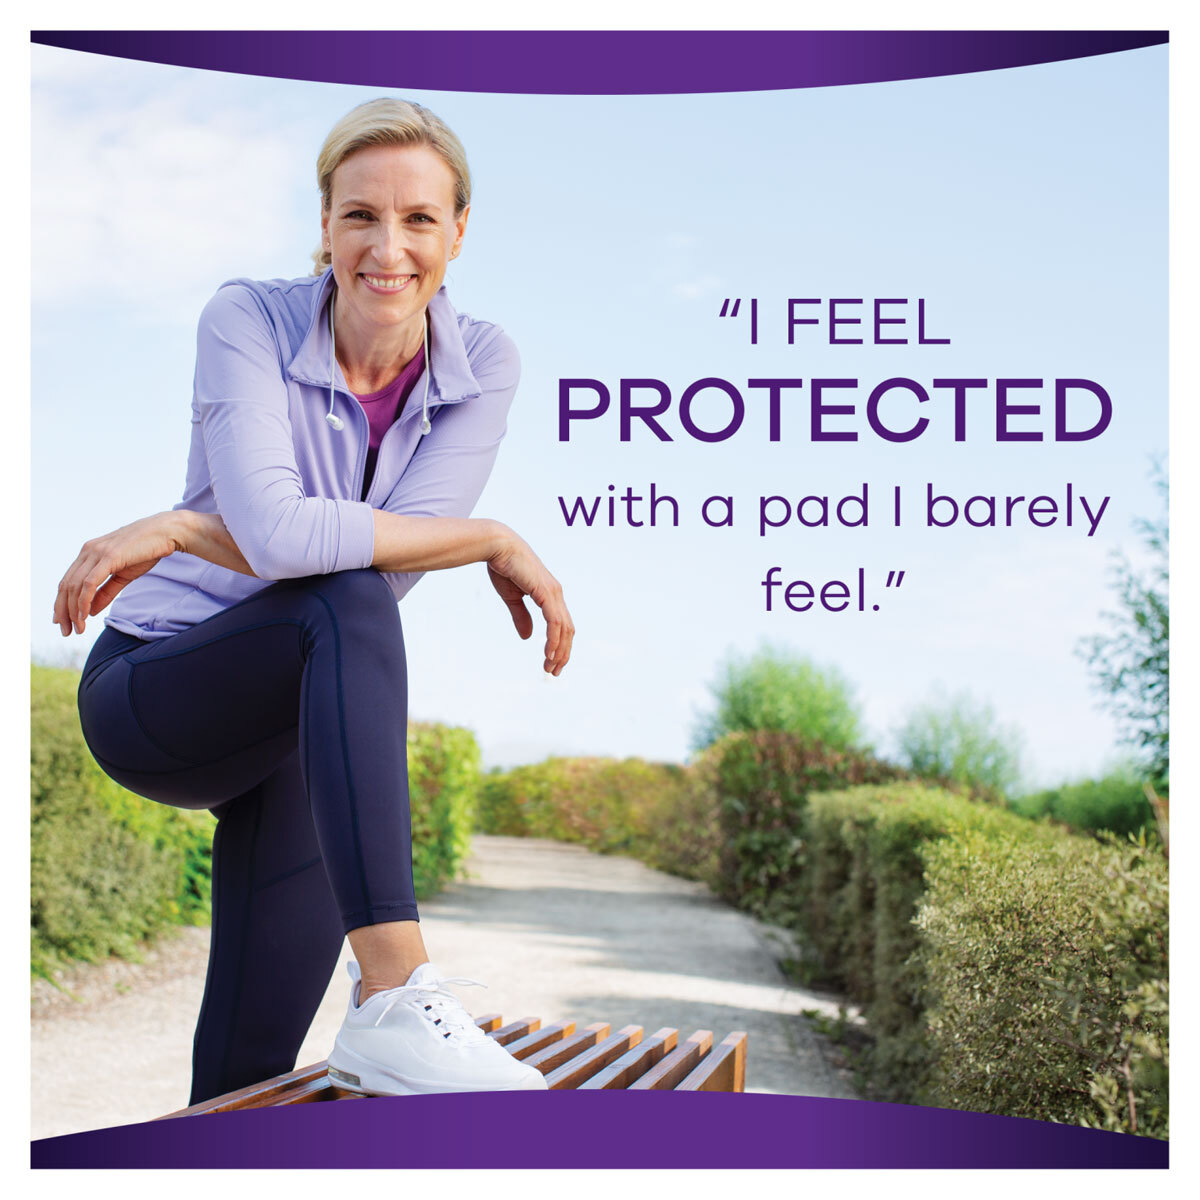 Lifestyle image quoting lady "I feel protexted with a pad I barely feel"